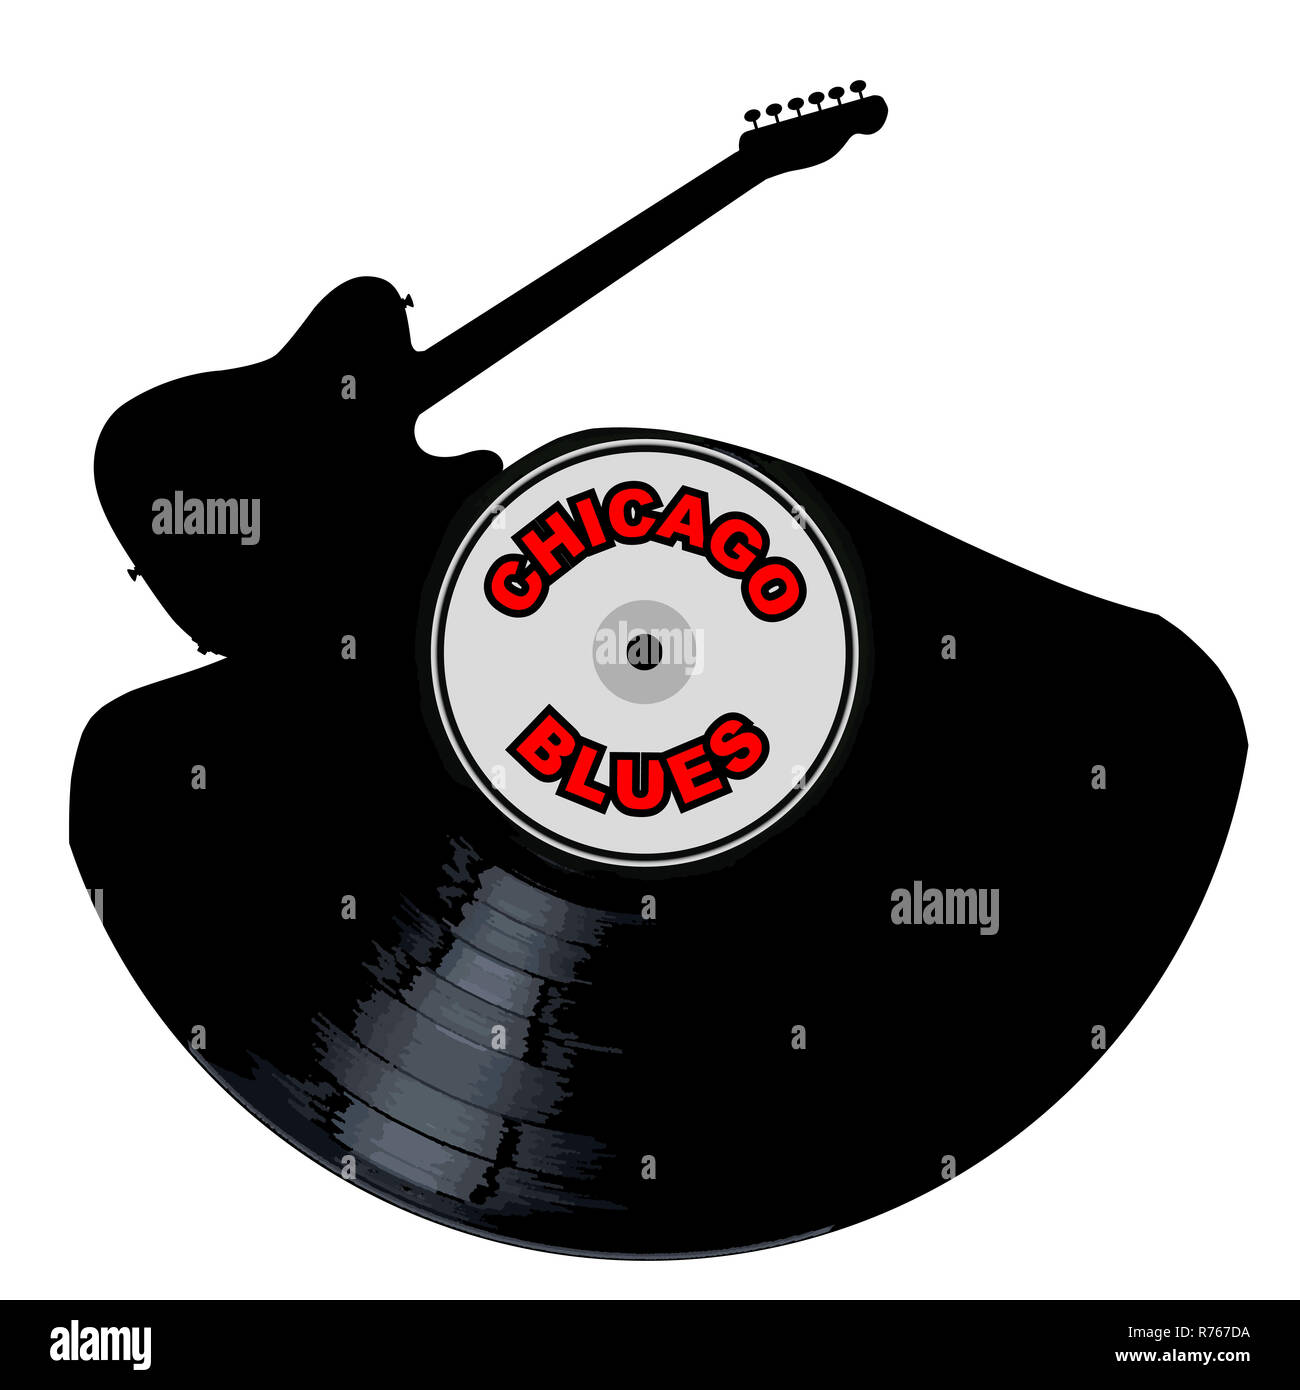 Chicago Blues Music Record Silhouette Banque D'Images